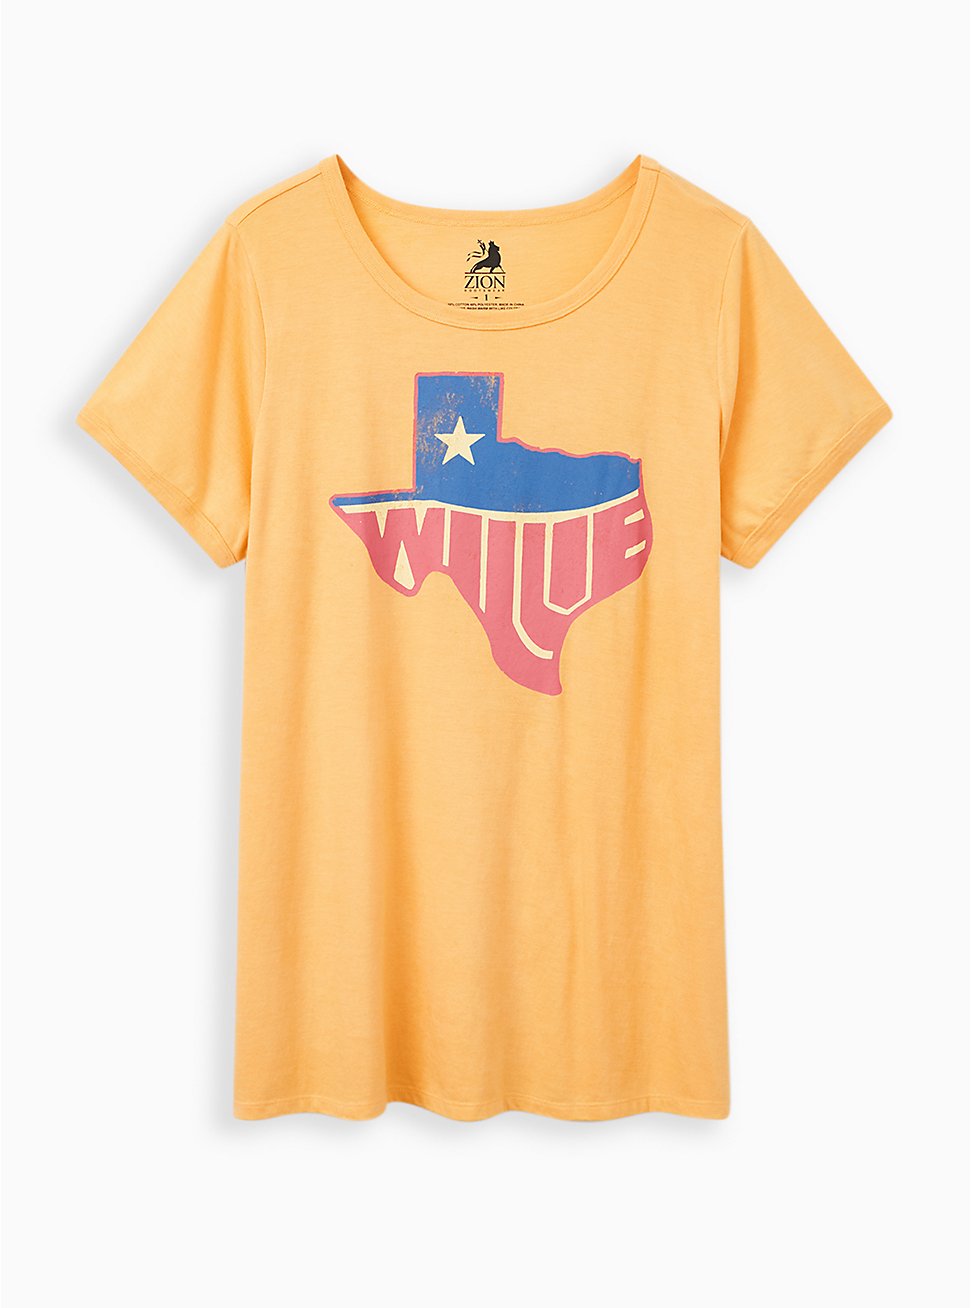 Classic Fit Ringer Tee - Willie Nelson Mustard Yellow, MINERAL YELLOW, hi-res